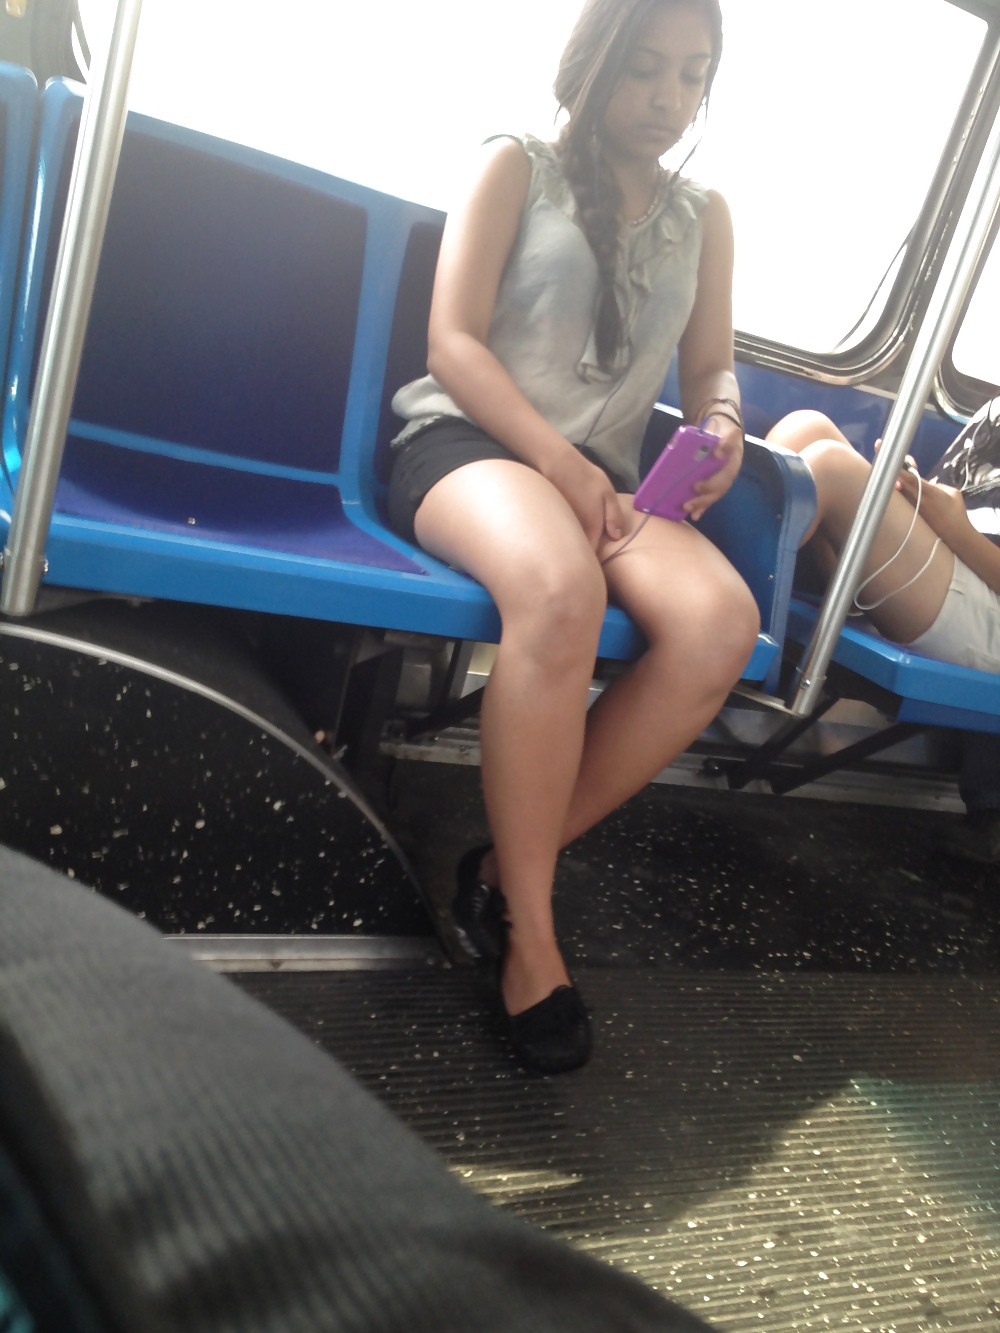 Just couldnt stop staring at her legs. #17542619